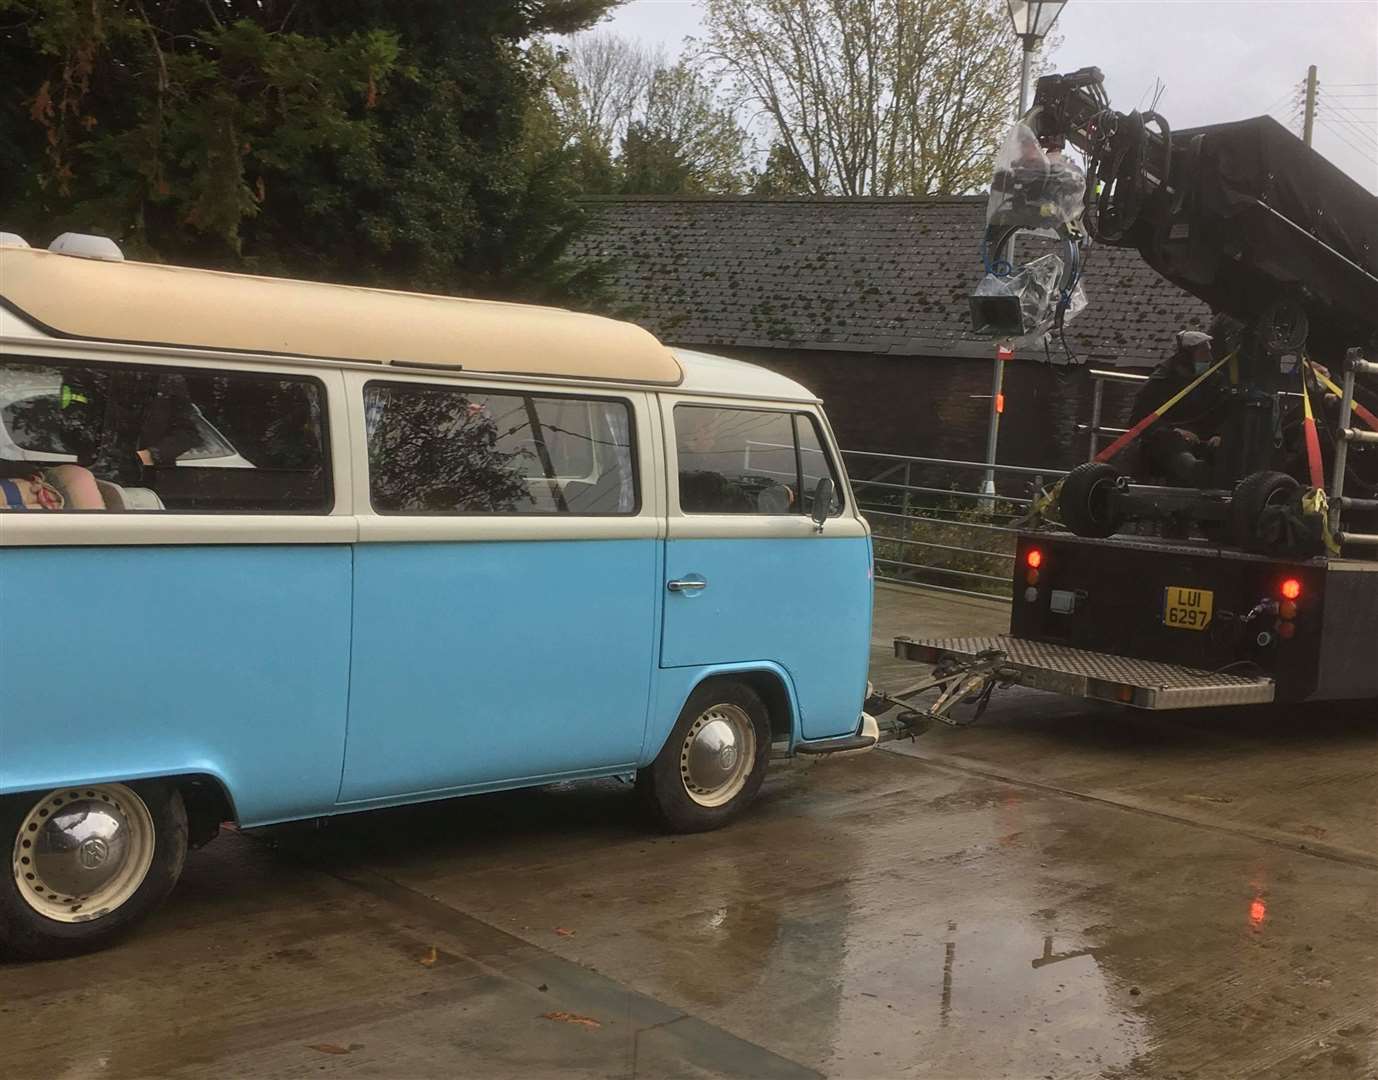 David Schwimmer was seen behind the wheel of a campervan in Mongeham Picture: Ian Lawrence